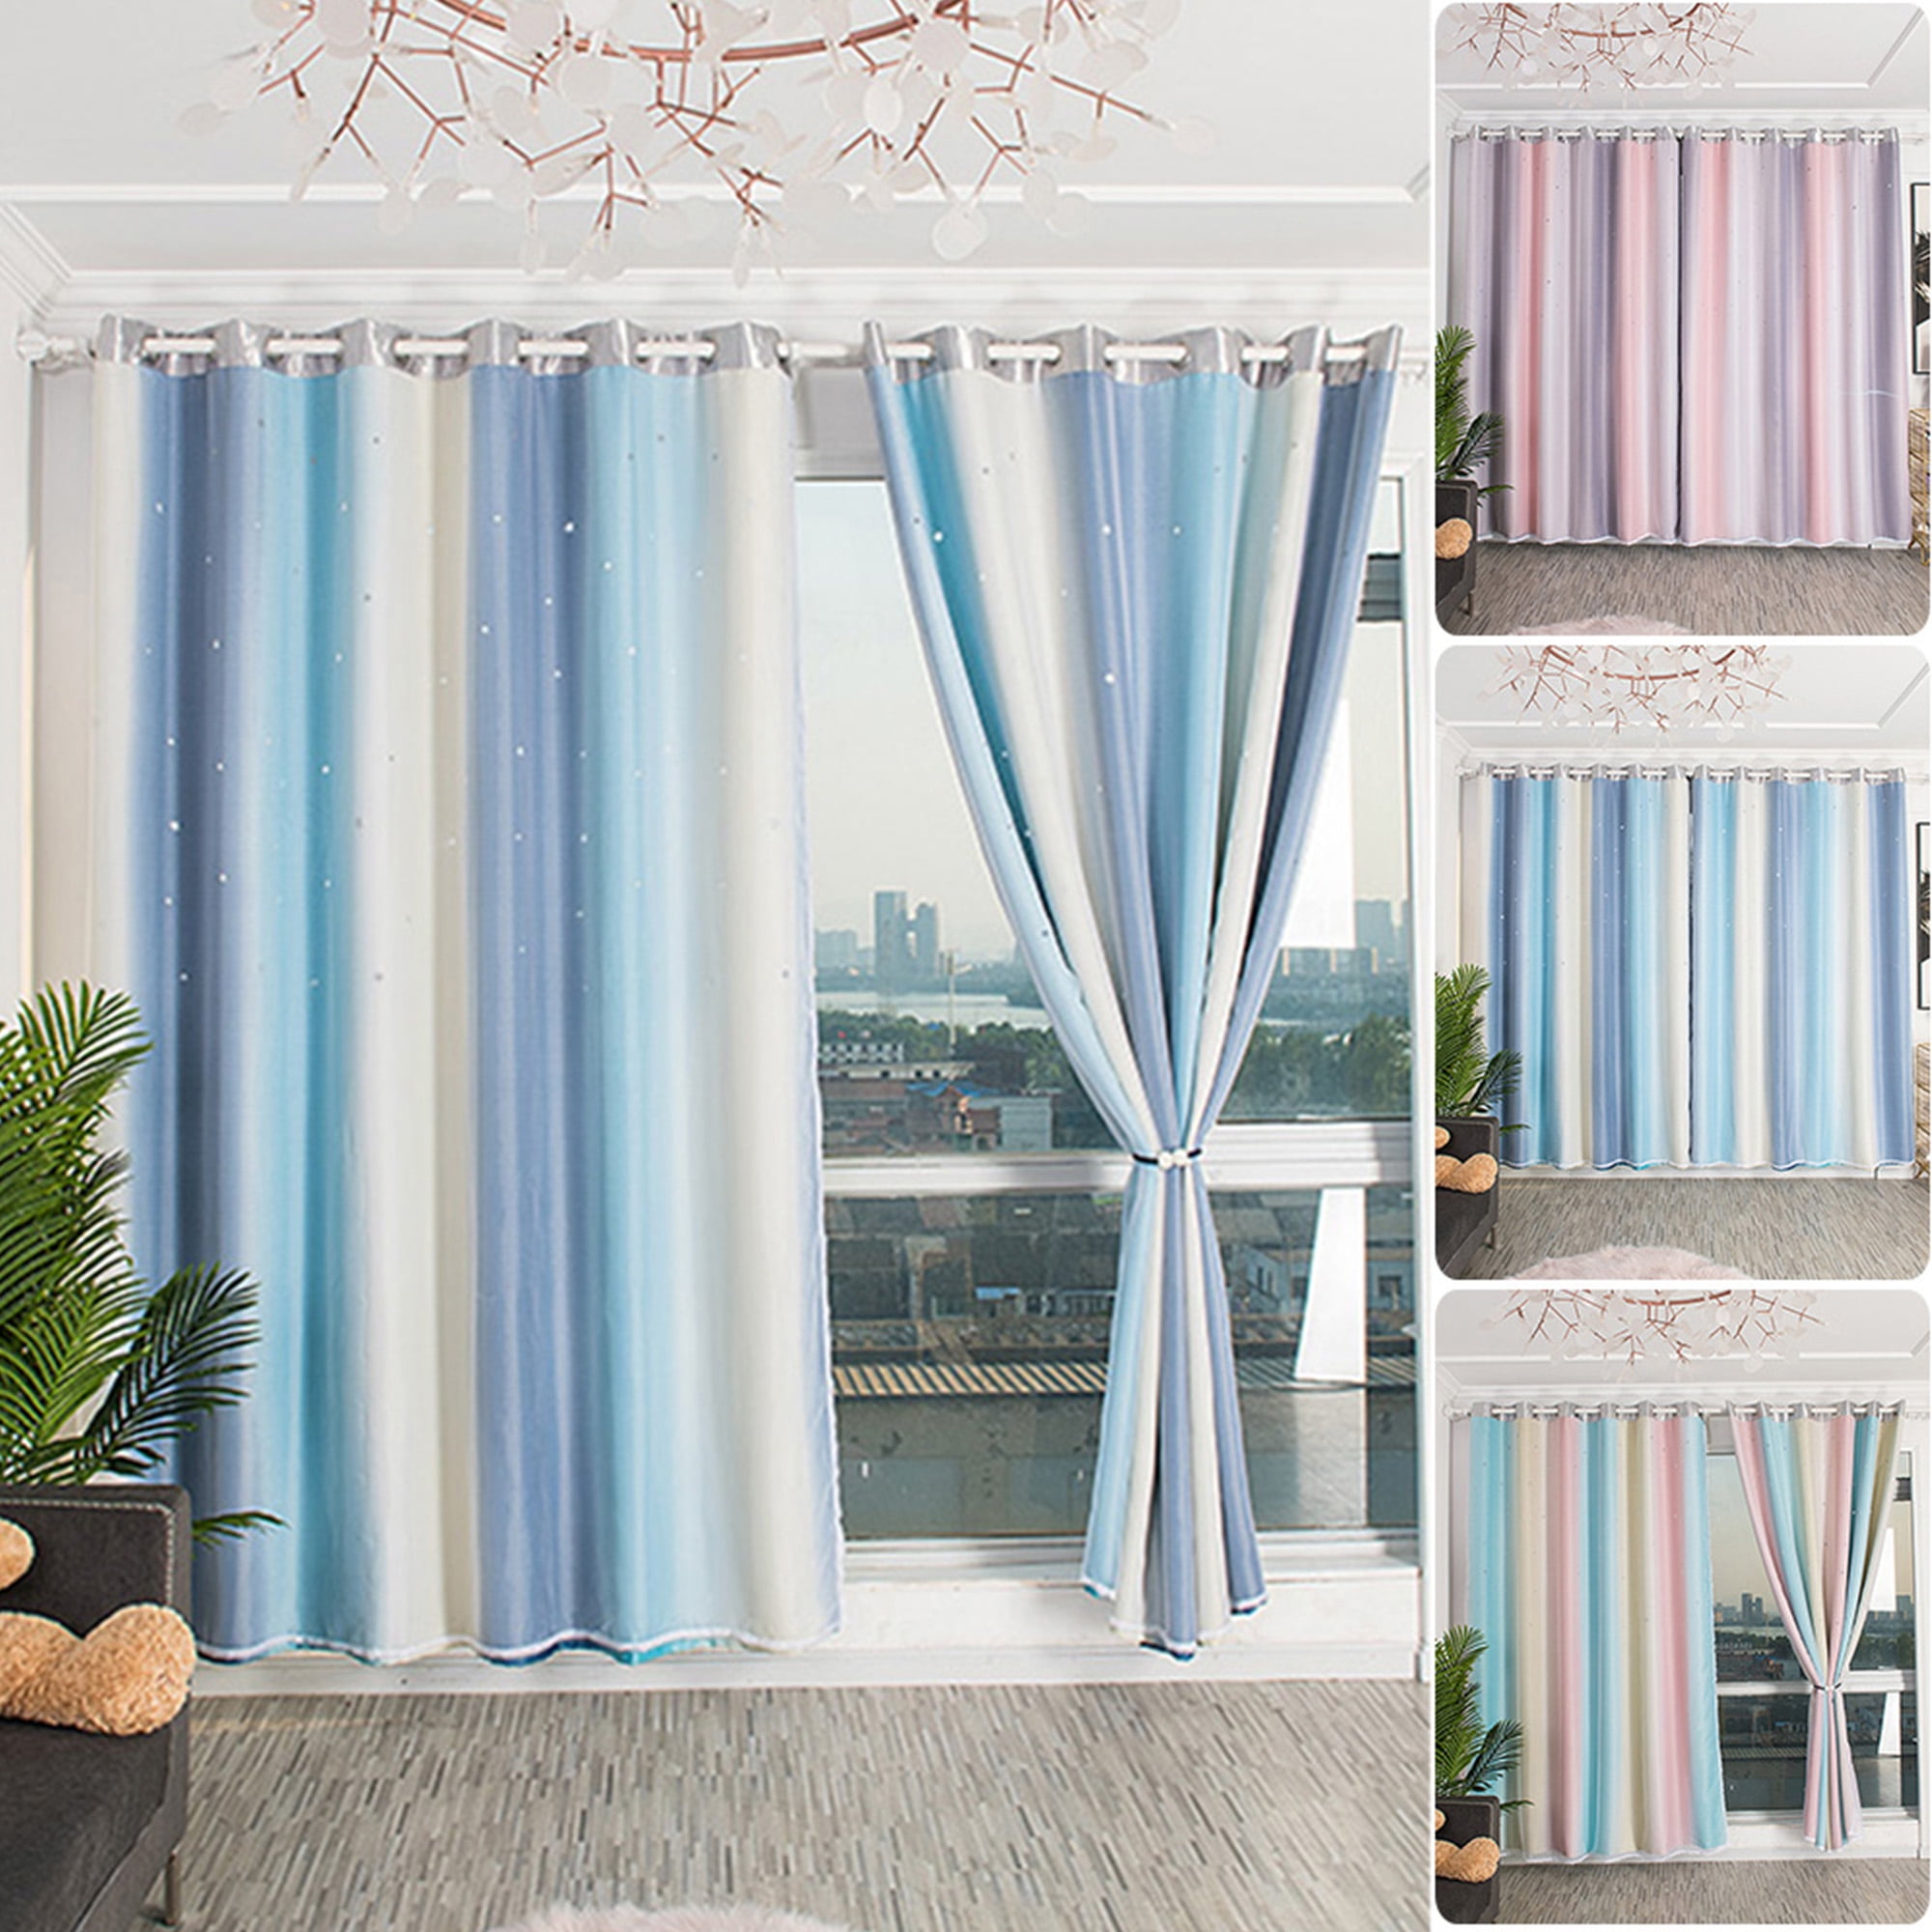 THERMAL BLACKOUT CURTAINS NET YARN DOUBLE LAYER READY MADE EYELET RING TOP VOILE 